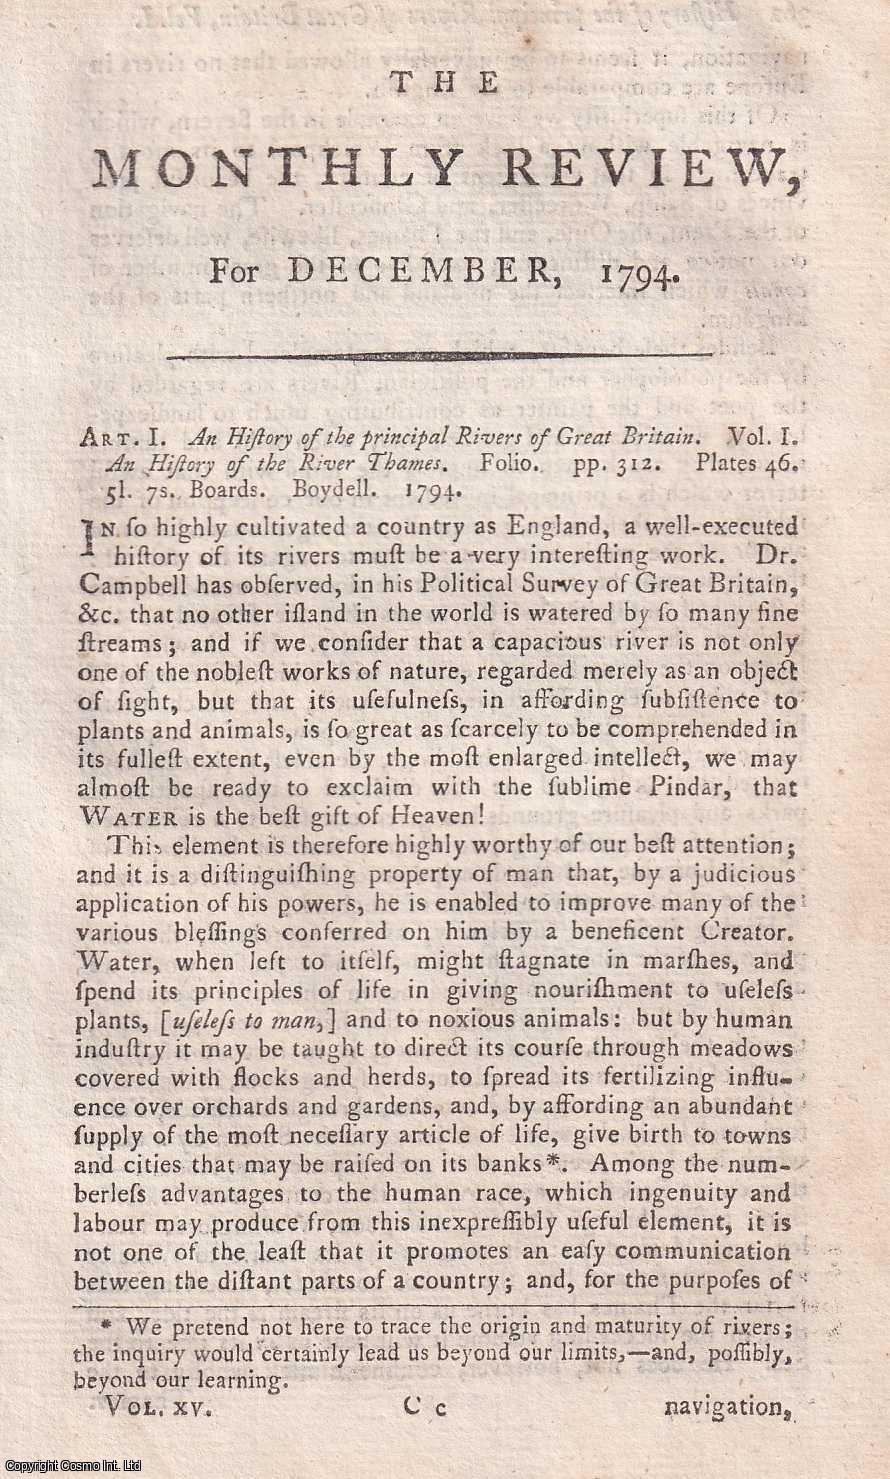 Author Not Stated - An History of the principal Rivers of Great Britain. An original essay from the Monthly Review, 1794. No author is given for this article.